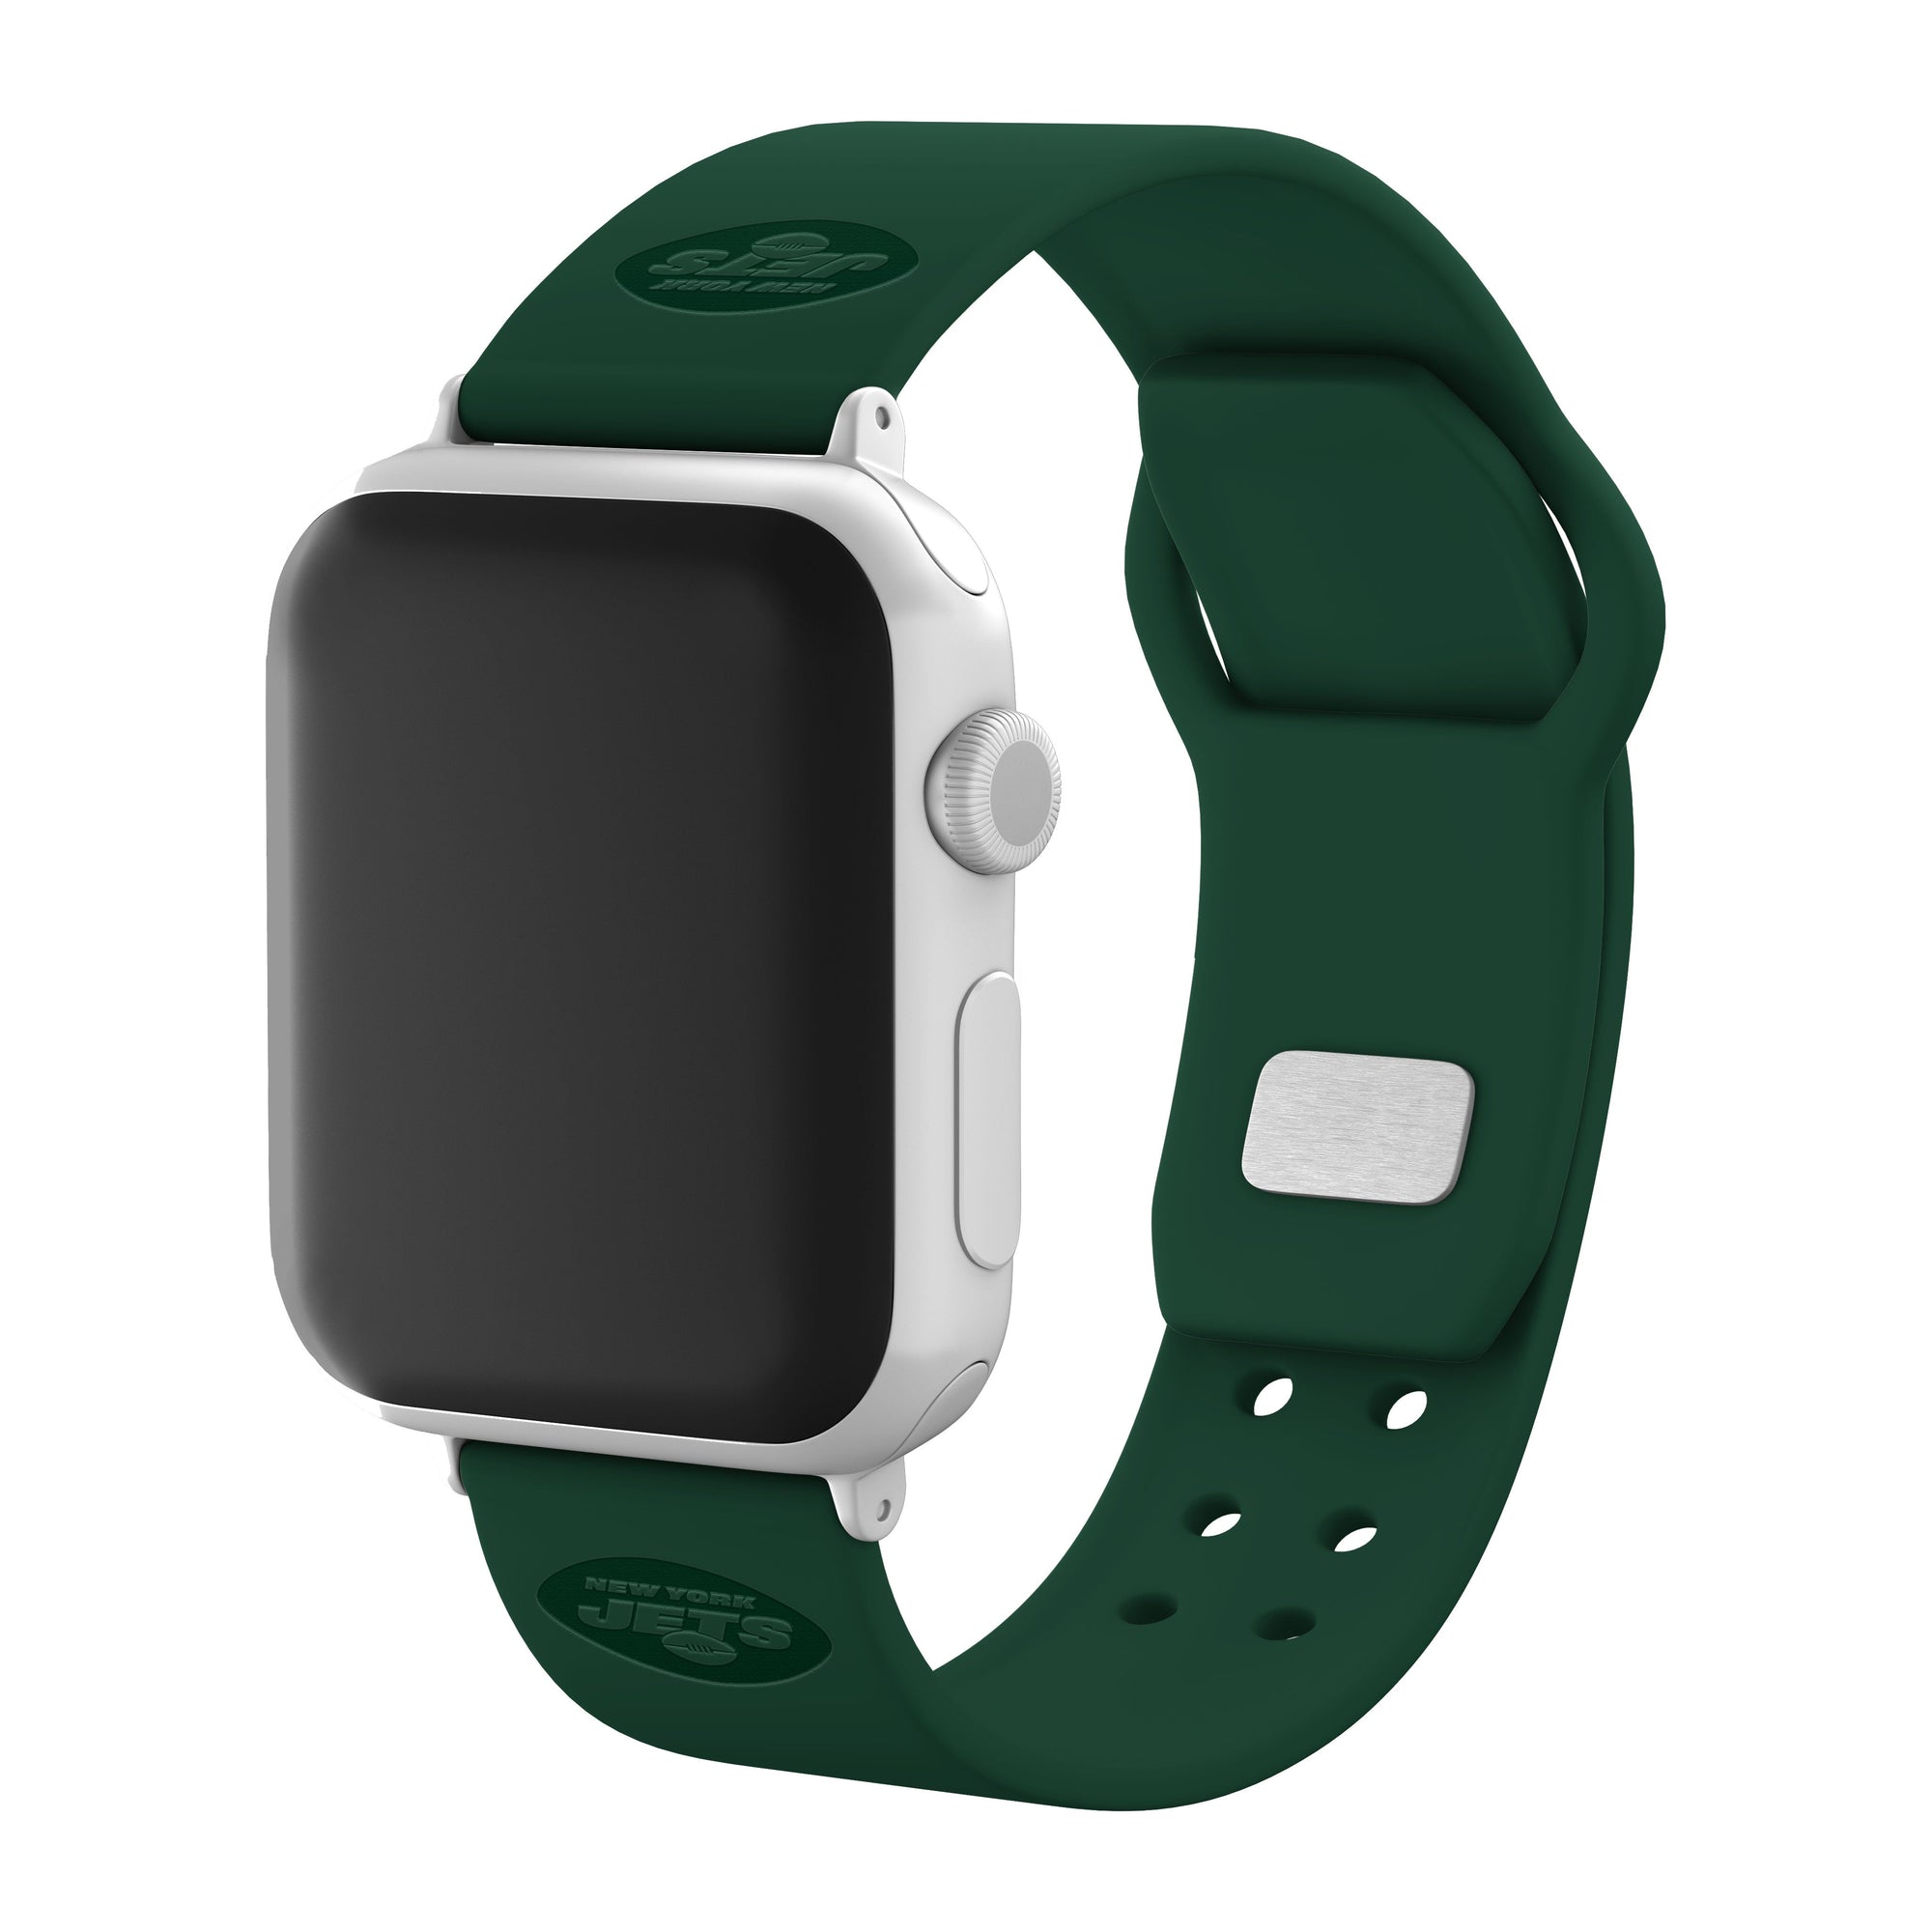 New York Jets Engraved Silicone 'Slim' Apple Watch Band